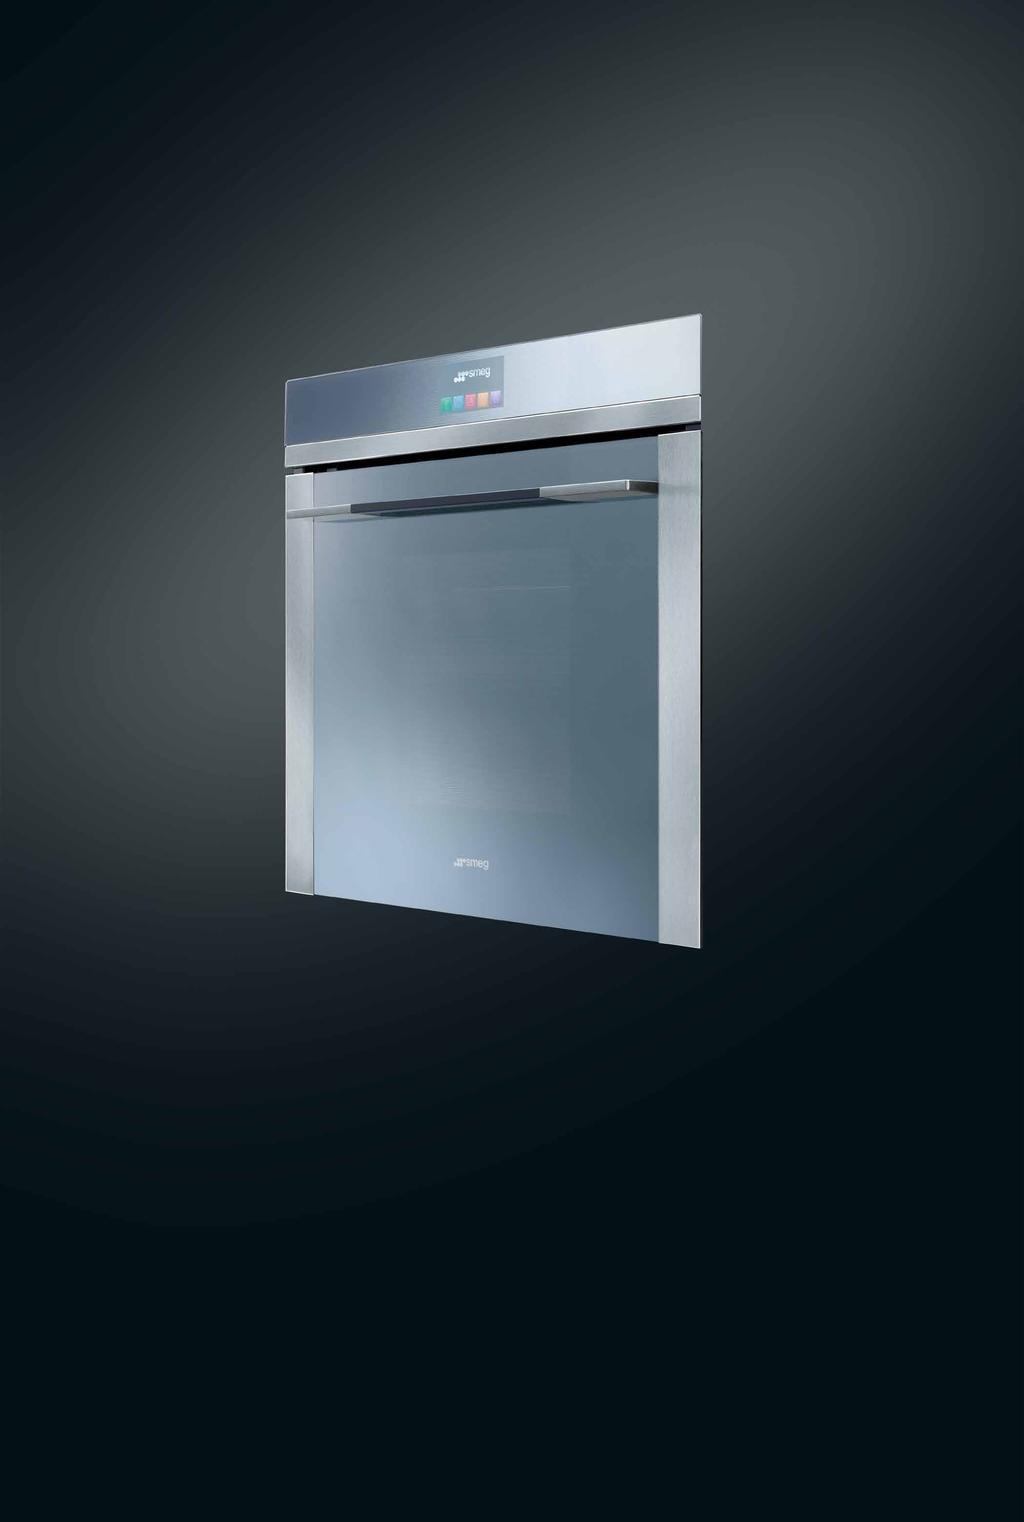 Thermoseal Smeg Thermoseal is the result of many decades of development in oven technology and is actually a combination of a number of innovations.